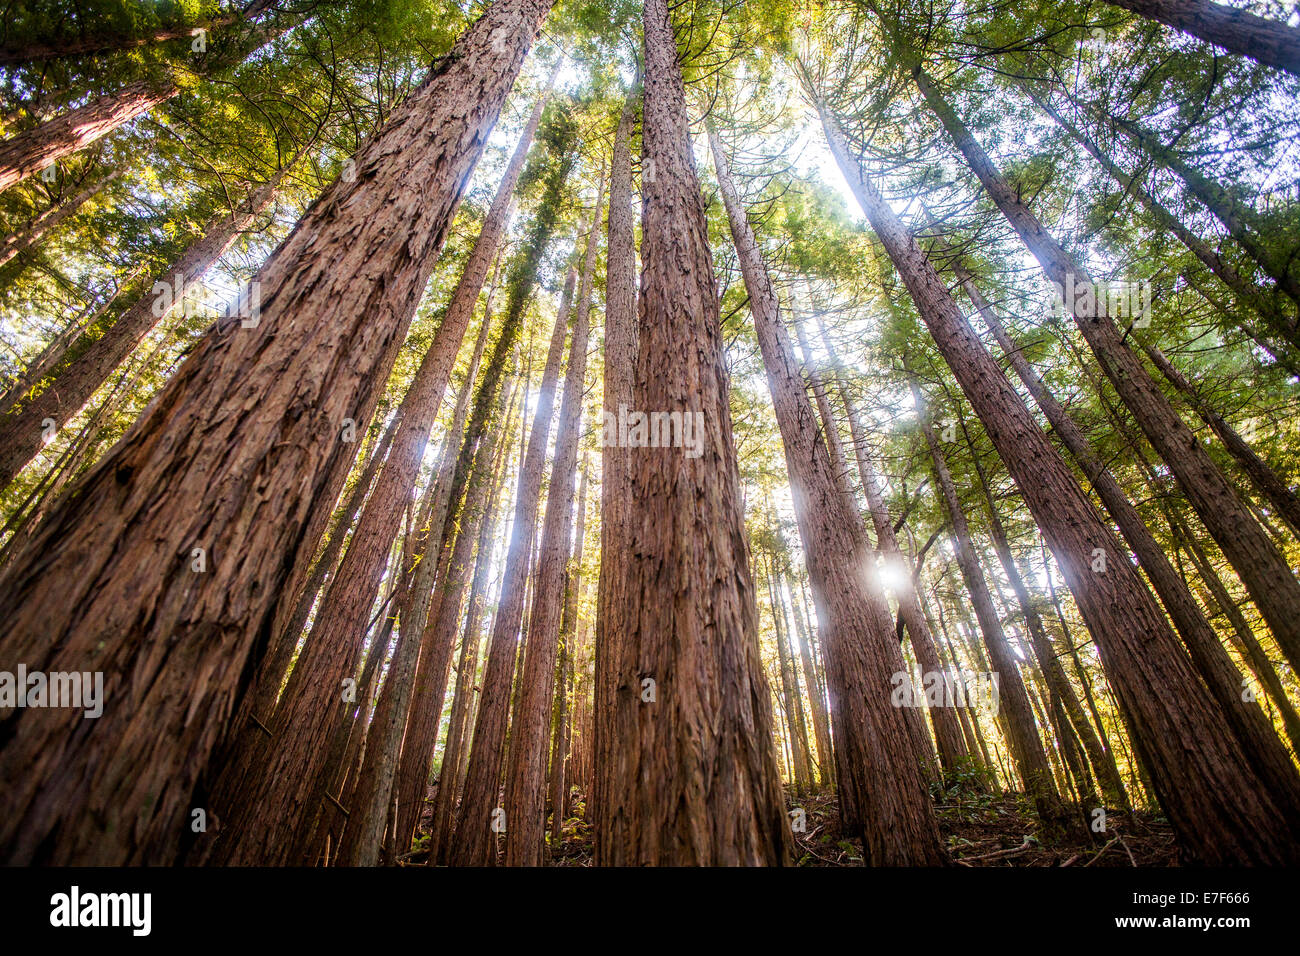 Low angle view of trees in sunny forest Stock Photo